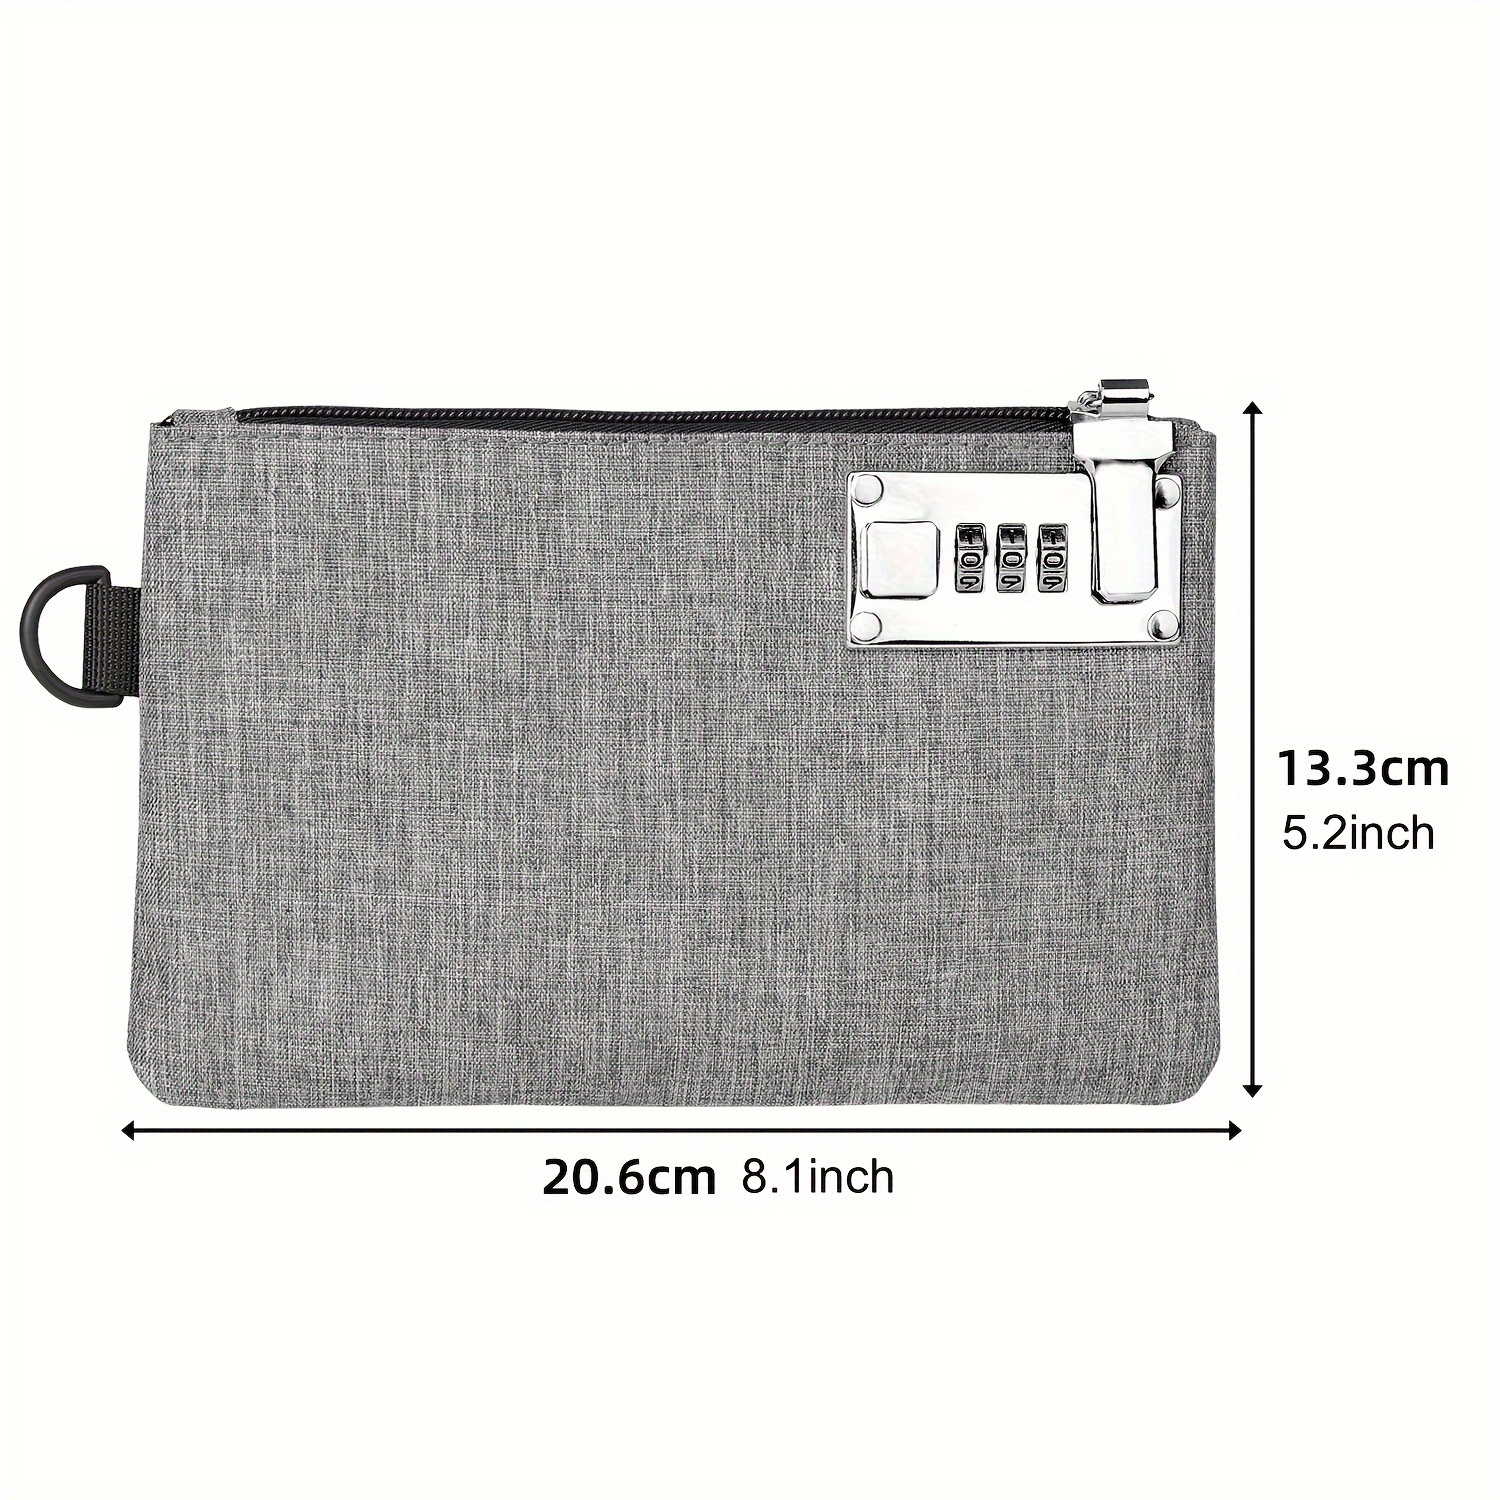 Money Wallet, Money Organizer for Cash with 6 Zippered Pocket